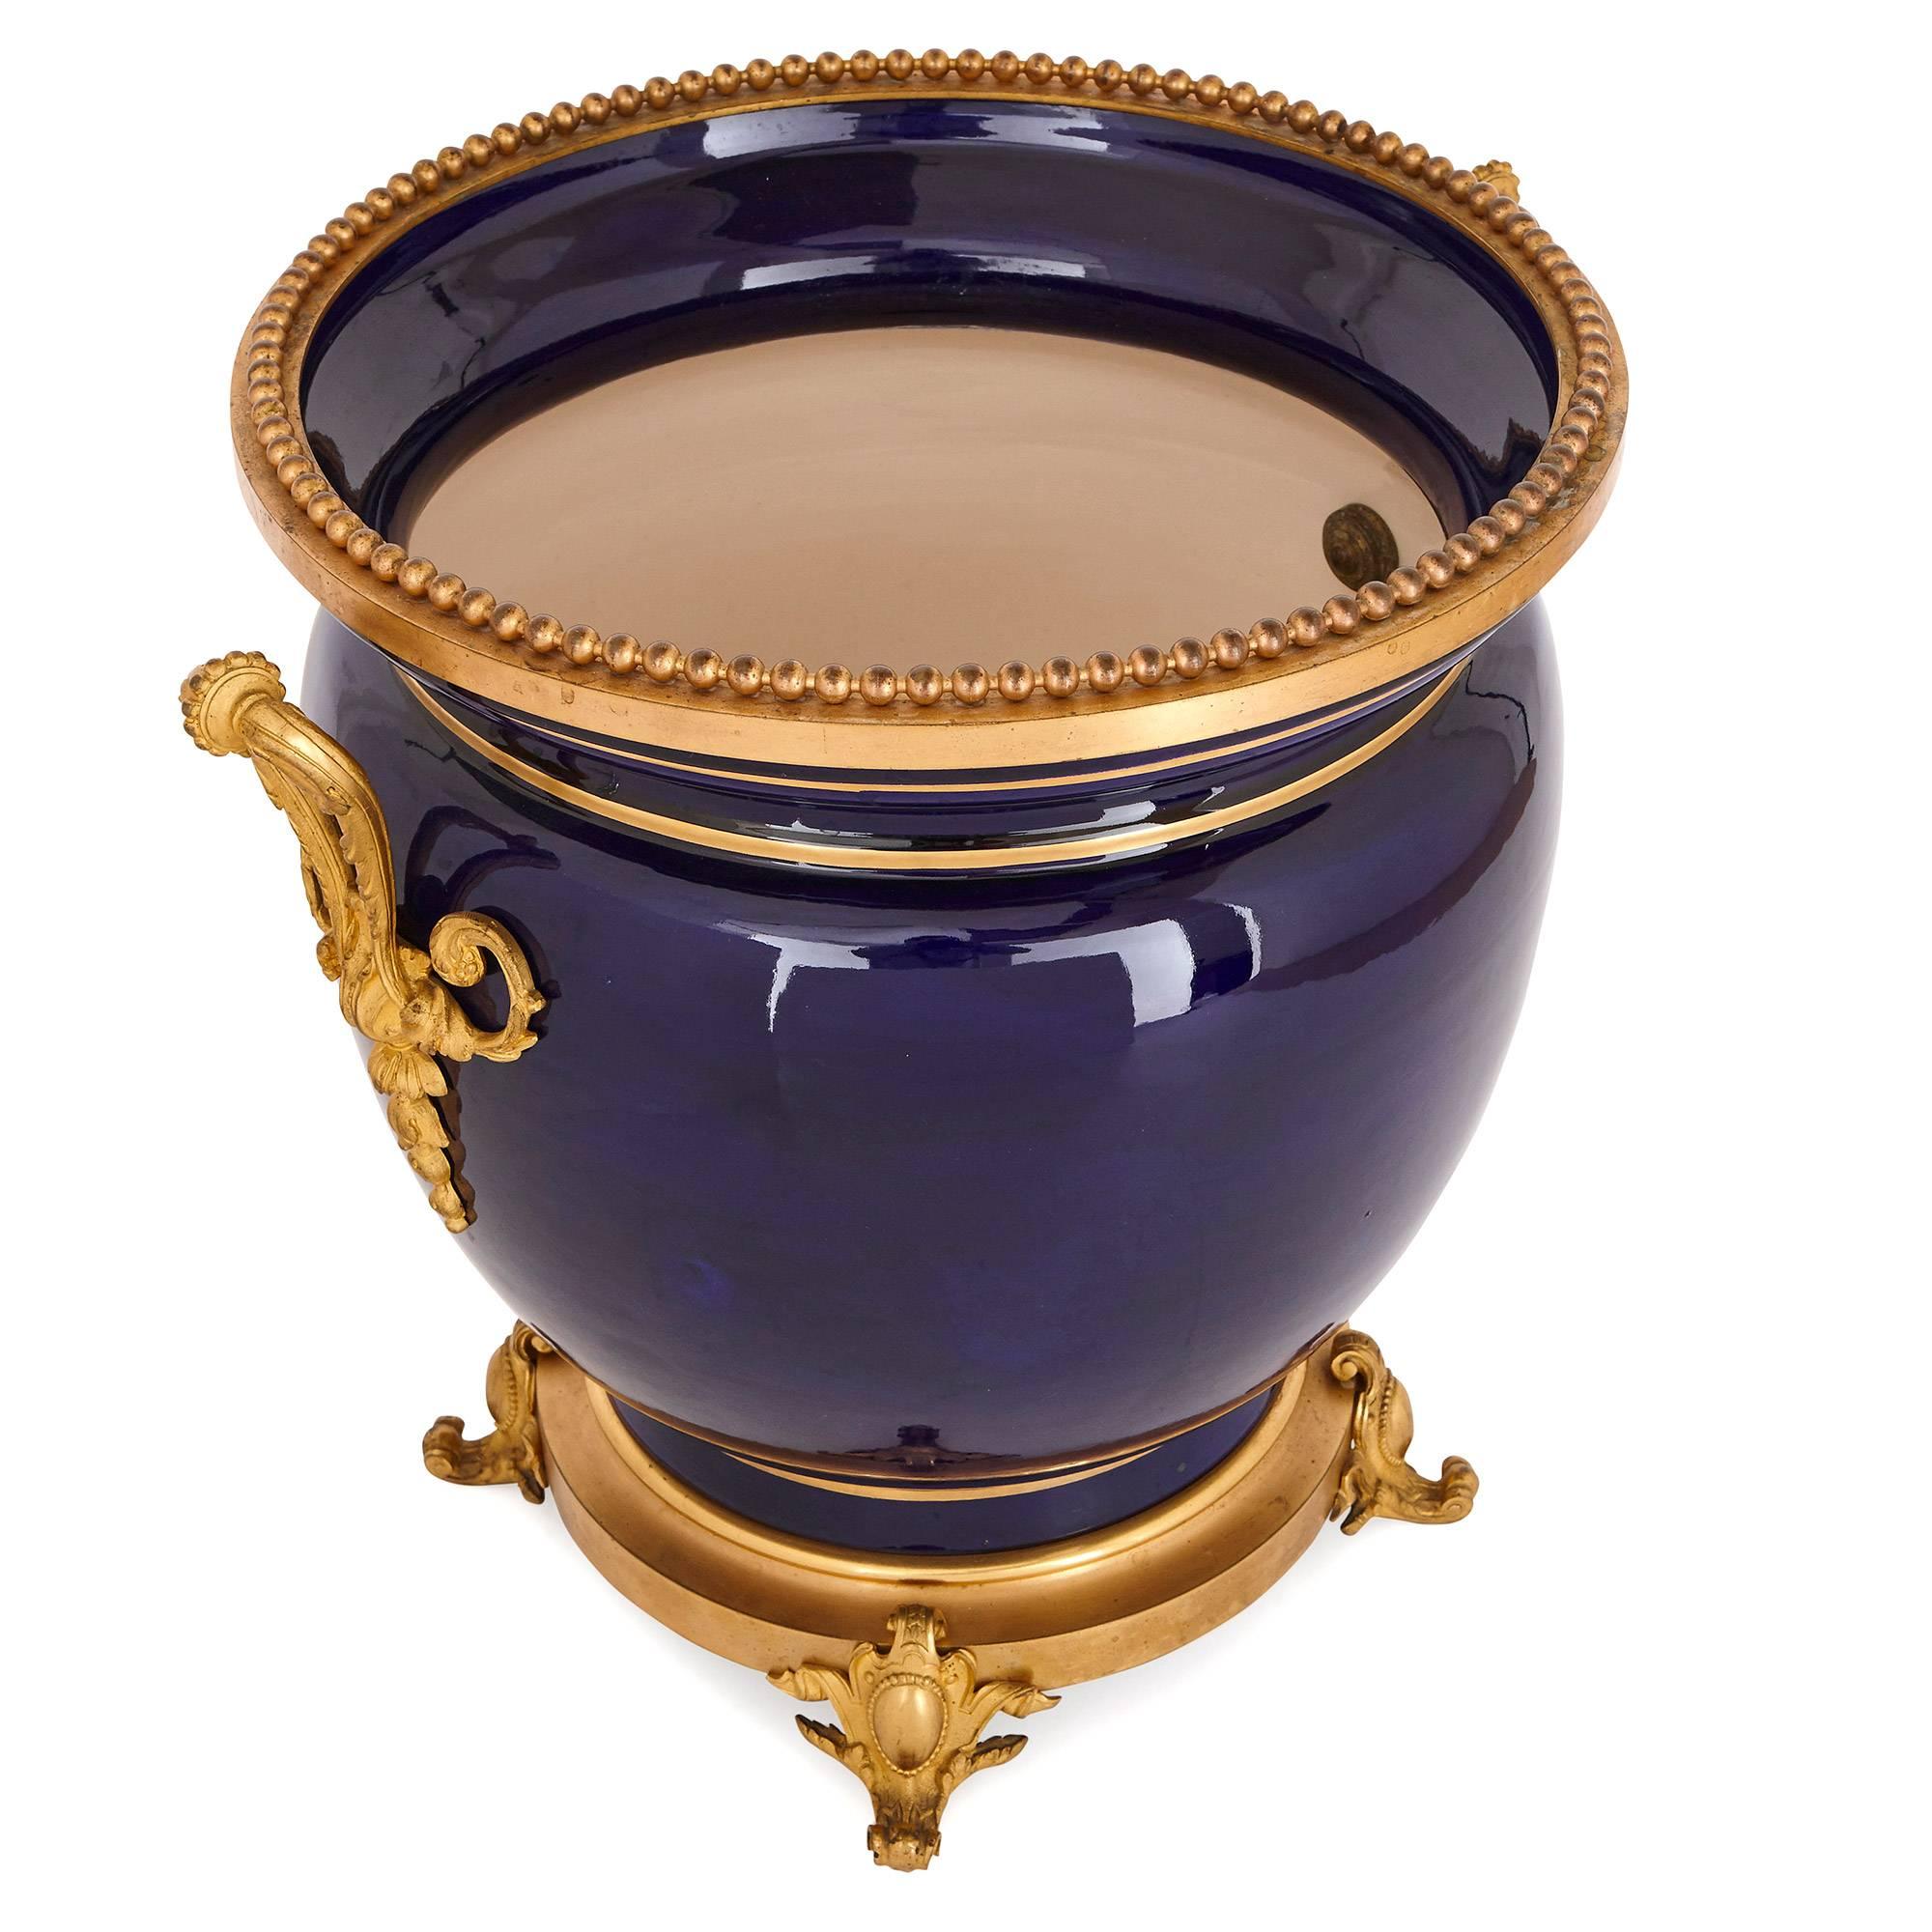 While this jardinière dates from the late 19th century, it feels strikingly contemporary in its combination of refined cobalt blue porcelain and sleek gilt bronze (ormolu) mounts.

The jardinière’s wide body is decorated with gilt bands around its